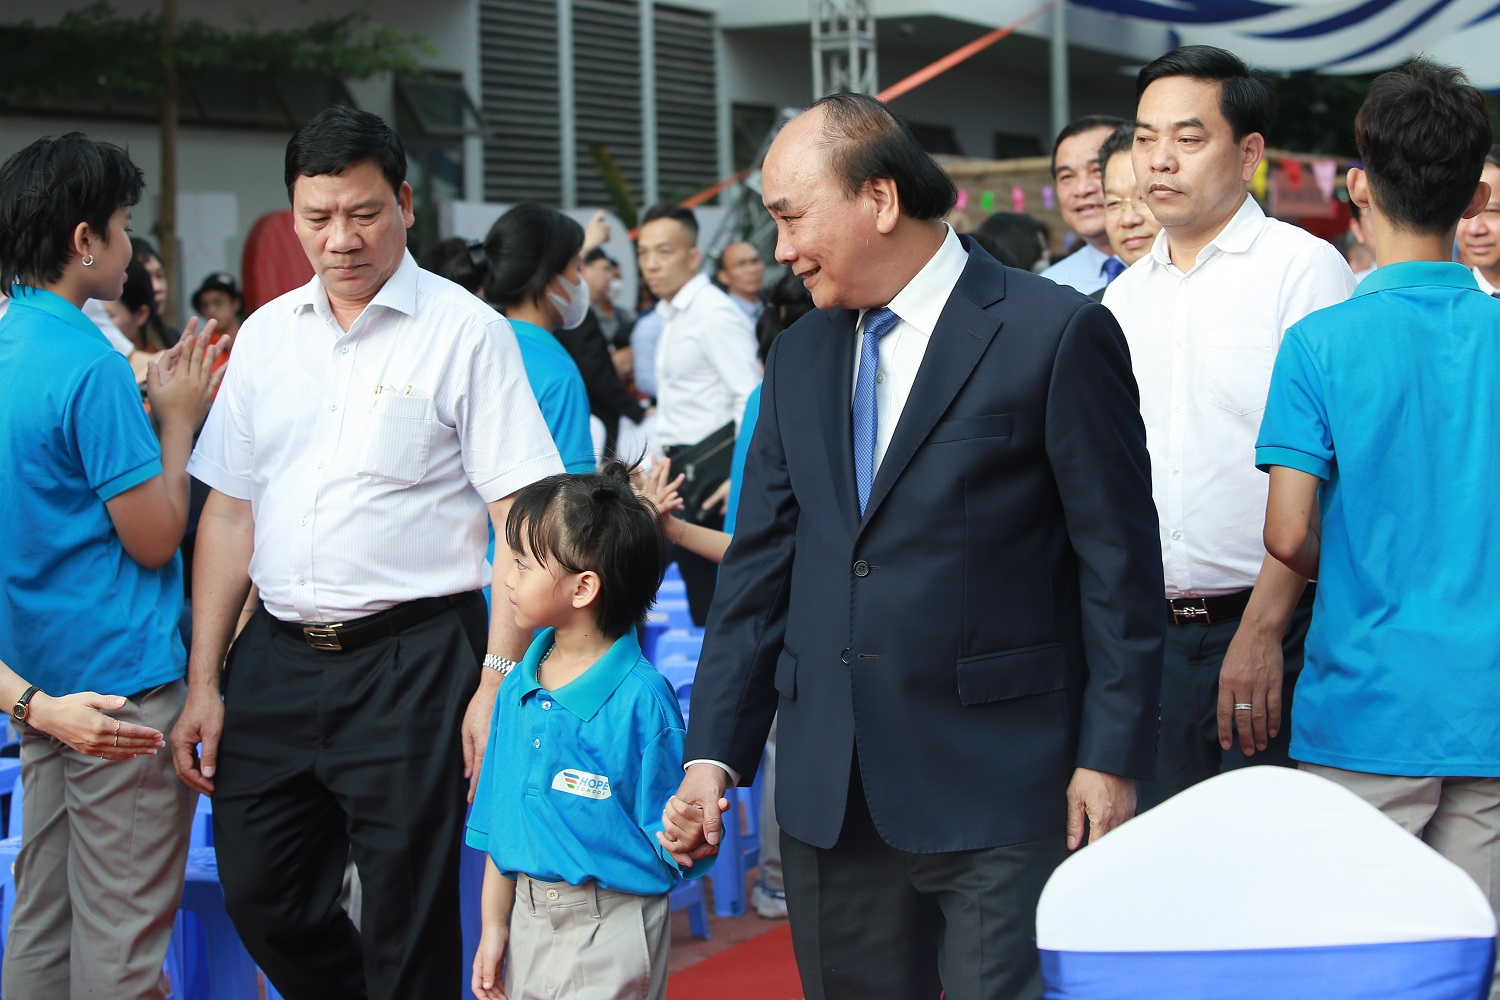 President Nguyen Xuan Phuc led Hope School students to their seats in the Opening Ceremony for the 2022-2023 academic year